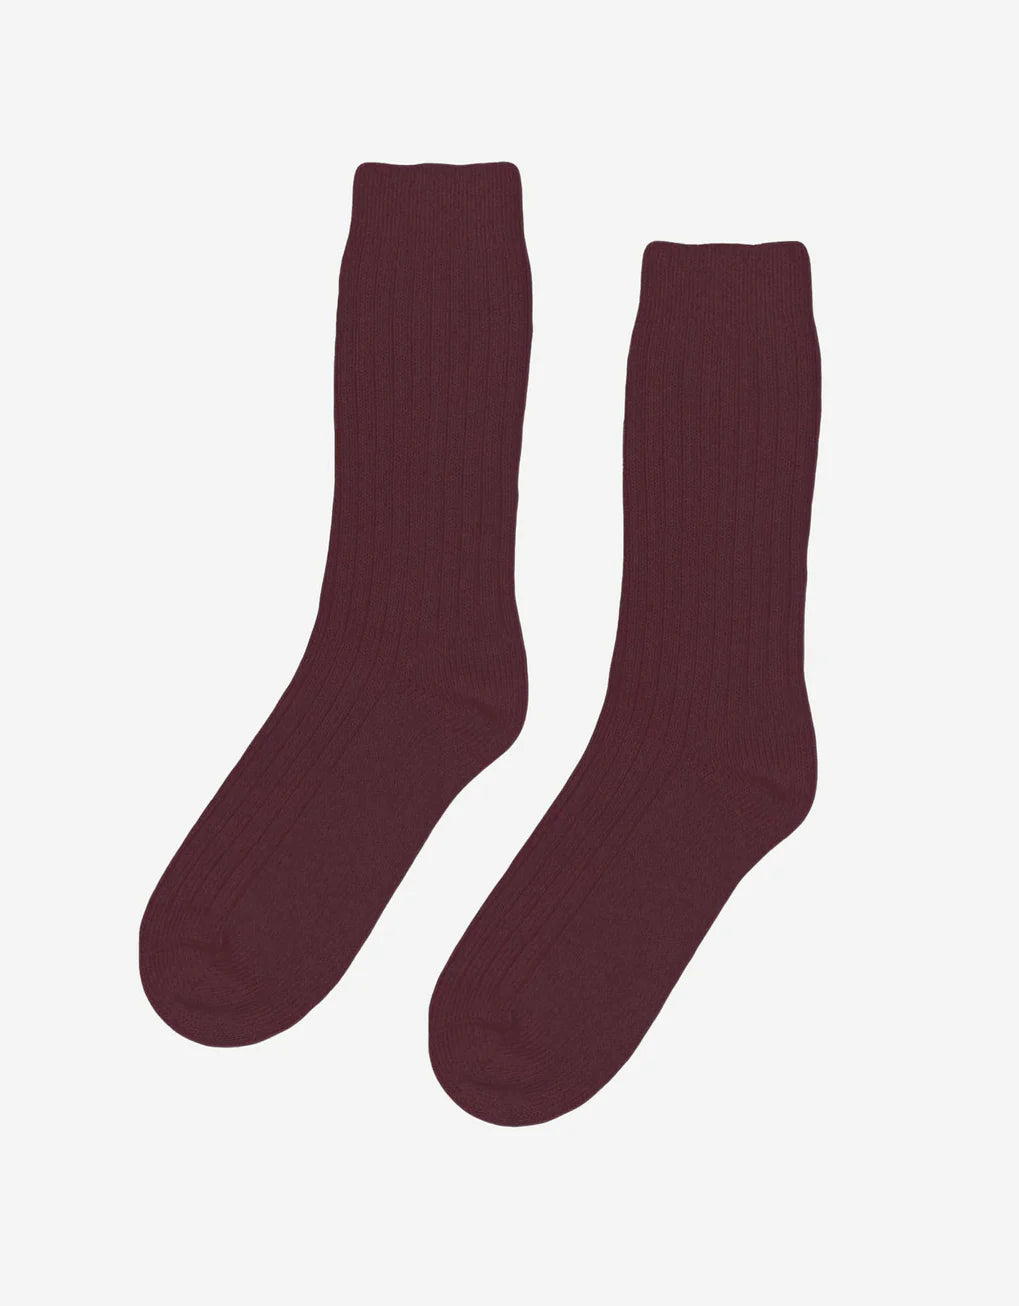 A pair of breathable Merino Wool Blend Socks by Colorful Standard on a white background.